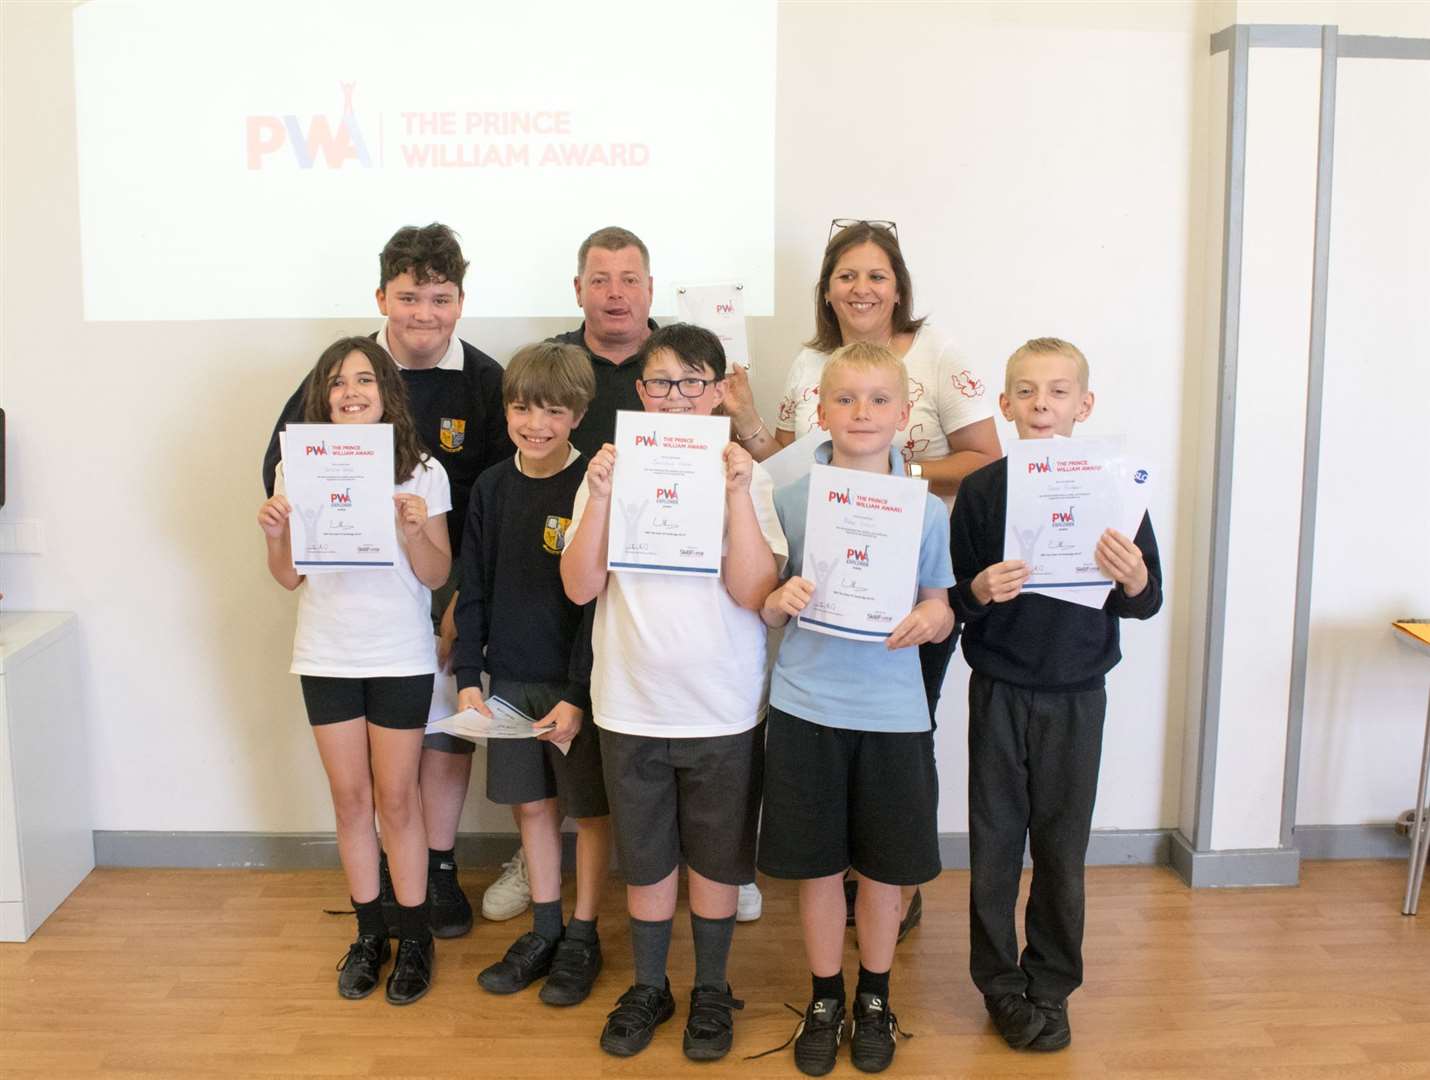 Pupils from Laleham Gap School in Ramsgate have completed the Prince William Award - the first school in East Kent to do so (14109153)